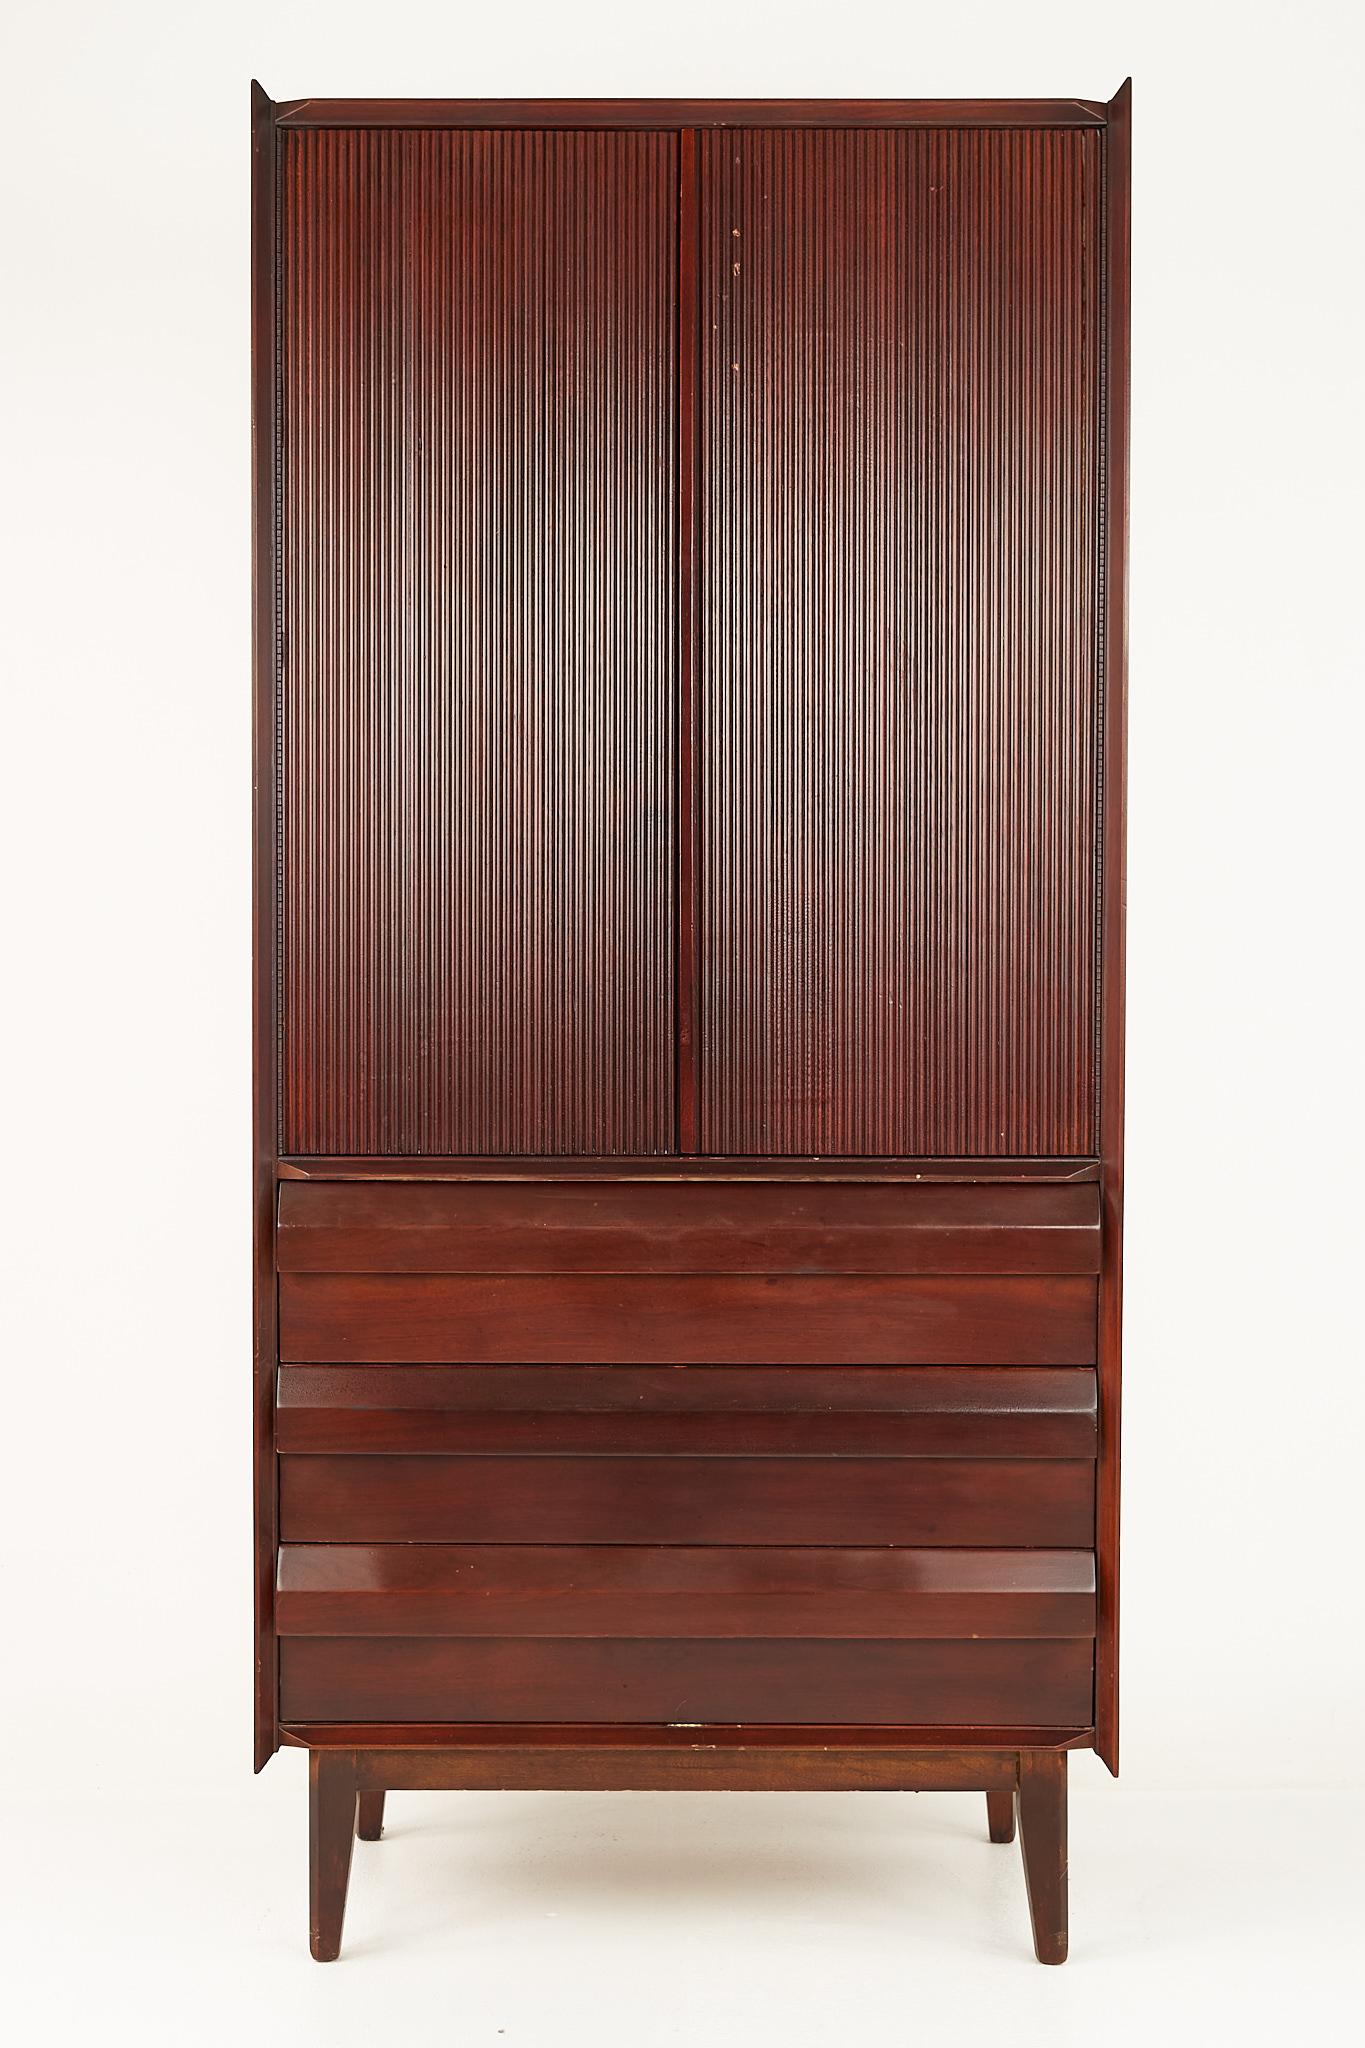 Lane first edition mid century gentlemans chest armoire

This armoire measures: 31.75 wide x 18 deep x 69 inches high

All pieces of furniture can be had in what we call restored vintage condition. That means the piece is restored upon purchase